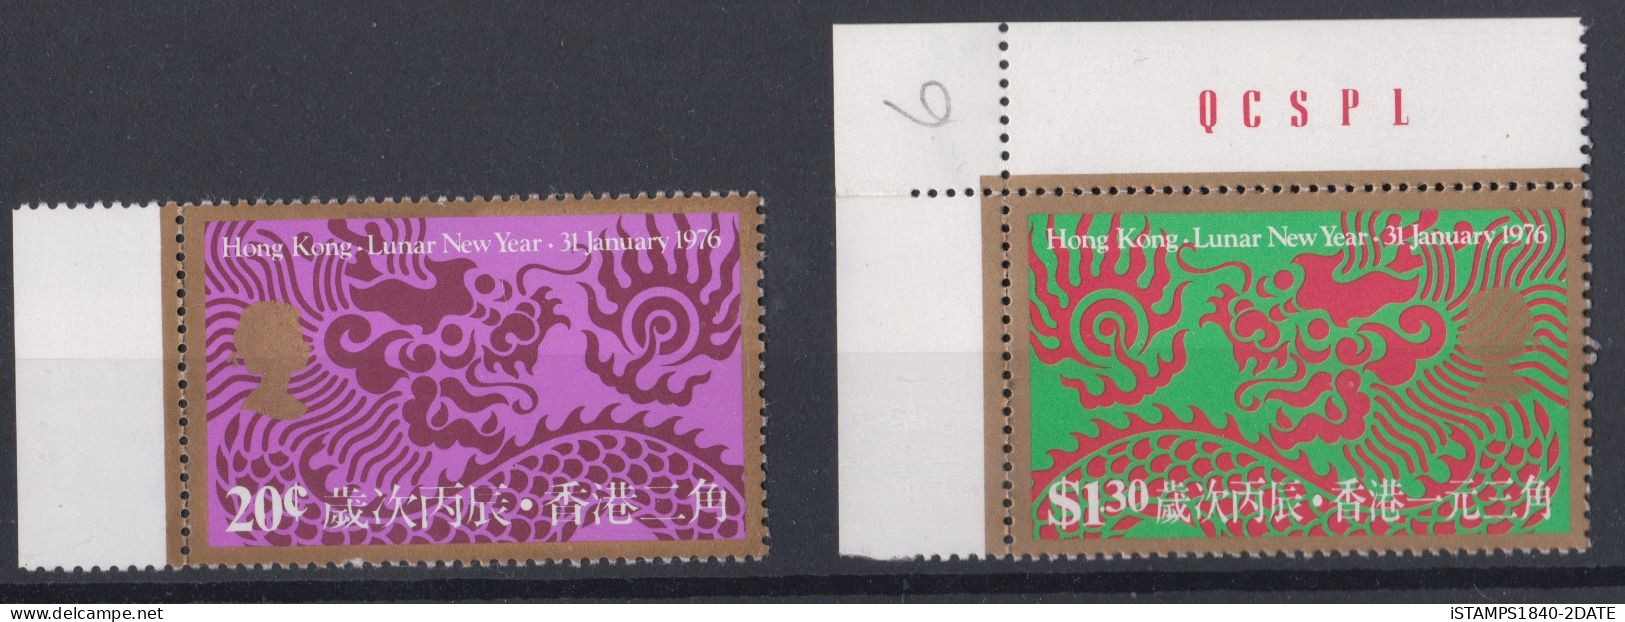 00926/ Hong Hong 1976 Sg338/39 MNH Chinese New Year. Year Of The Dragon. Set Of 2 - Unused Stamps